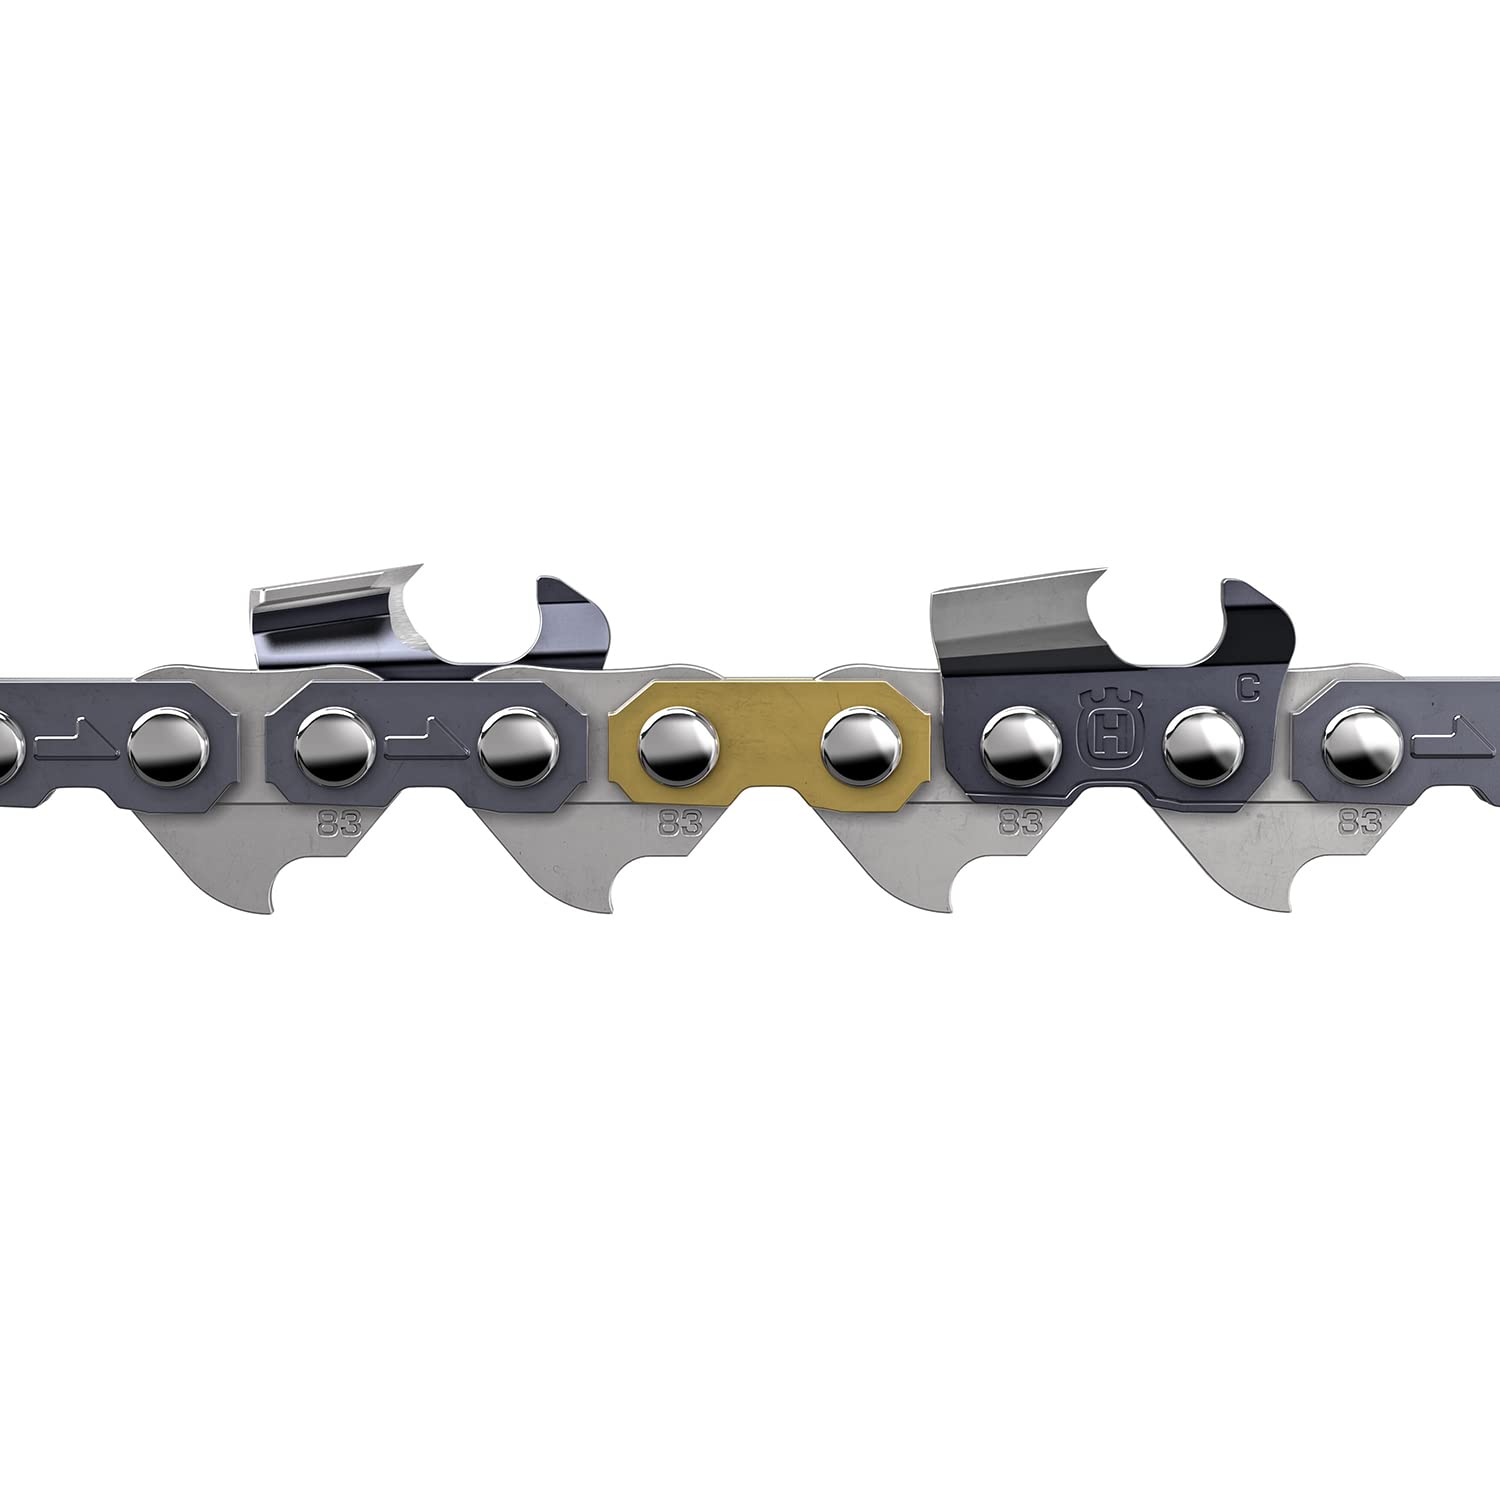 Husqvarna X-Cut C83 24 Inch Chainsaw Chain, 3/8" Pitch, .050" Gauge, 84 Drive Links, Genuine Husqvarna Chainsaw Blade Replacement with Low Stretch and Low Vibration, Gray